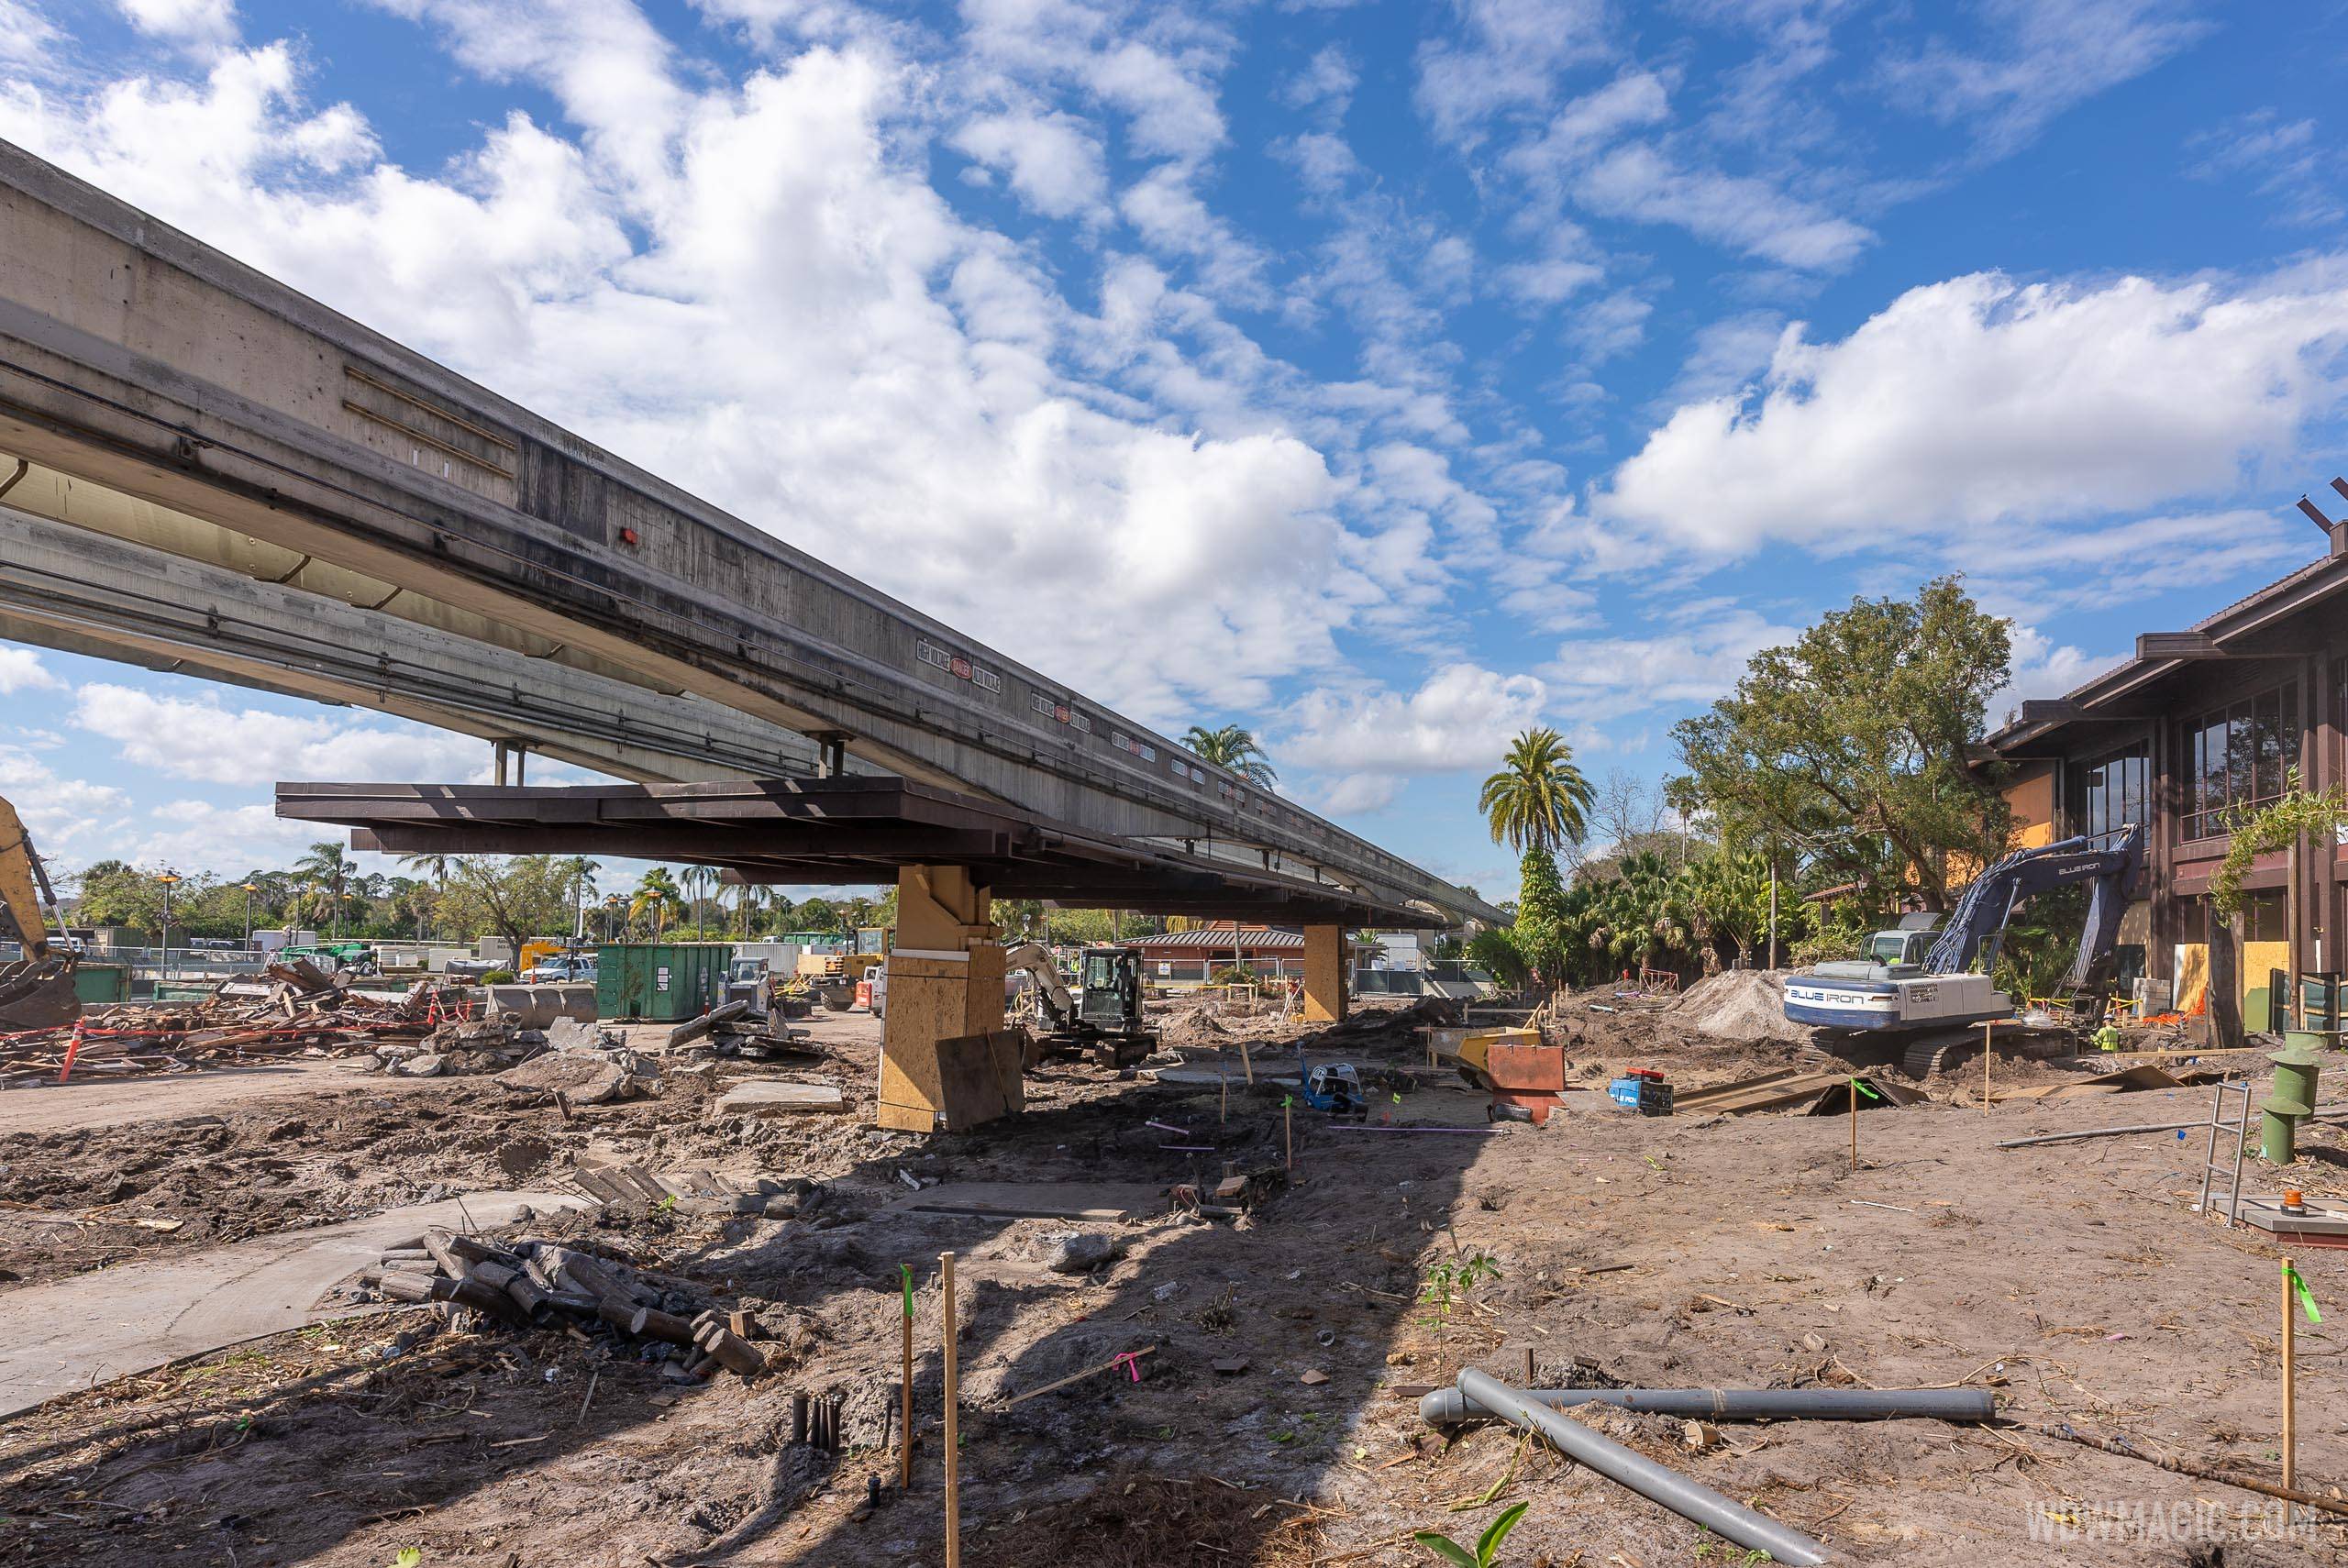 PHOTOS - Monorail station demolished as work continues on the new entrance at Disney's Polynesian Village Resort